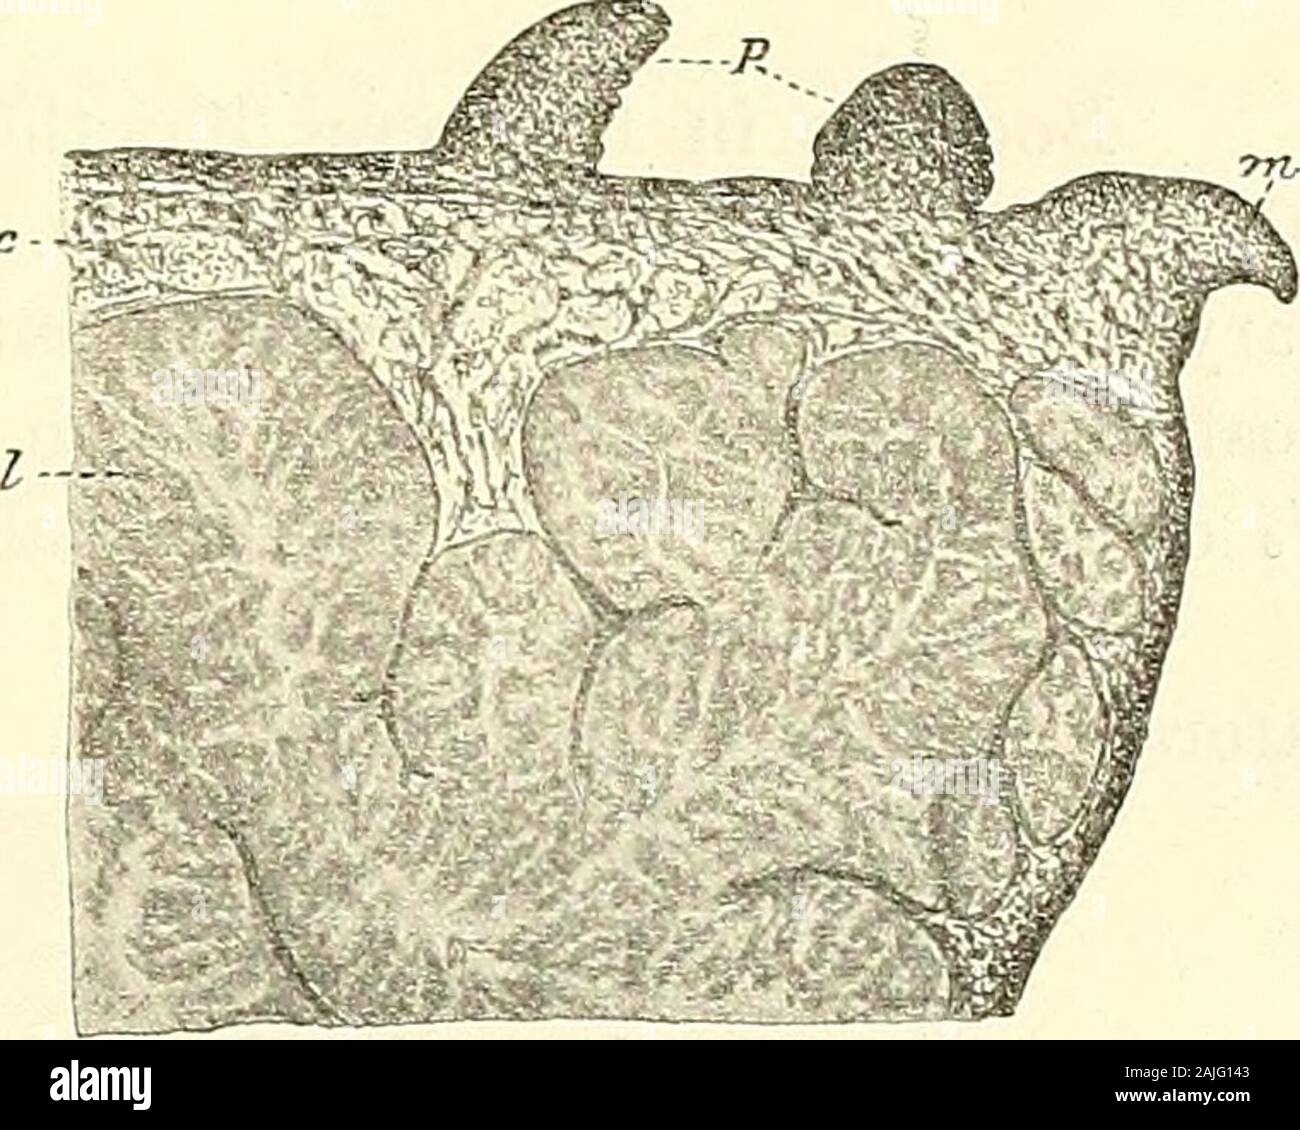 Svenska vetenskapsakademien handlingar . behind themiddle of the right side; the lips are not pro-jecting; the jaws are furnished with a denticu-lated process, and the teeth of the radula areserrated (lam. med. with 9 denticles on eacli side).The liver, furthermore, is enclosed in the papil-lae. These differences were observed by Bergh, of the body of Goniieolis lobata (ef. Plate I but he supposes that Särs examination may have £ti^tis^eyTl!5r. ?? been imperfect and that it may be possible toidentify the species. It is consequently evident that Berghs species is a different one from M. Särs,an Stock Photo